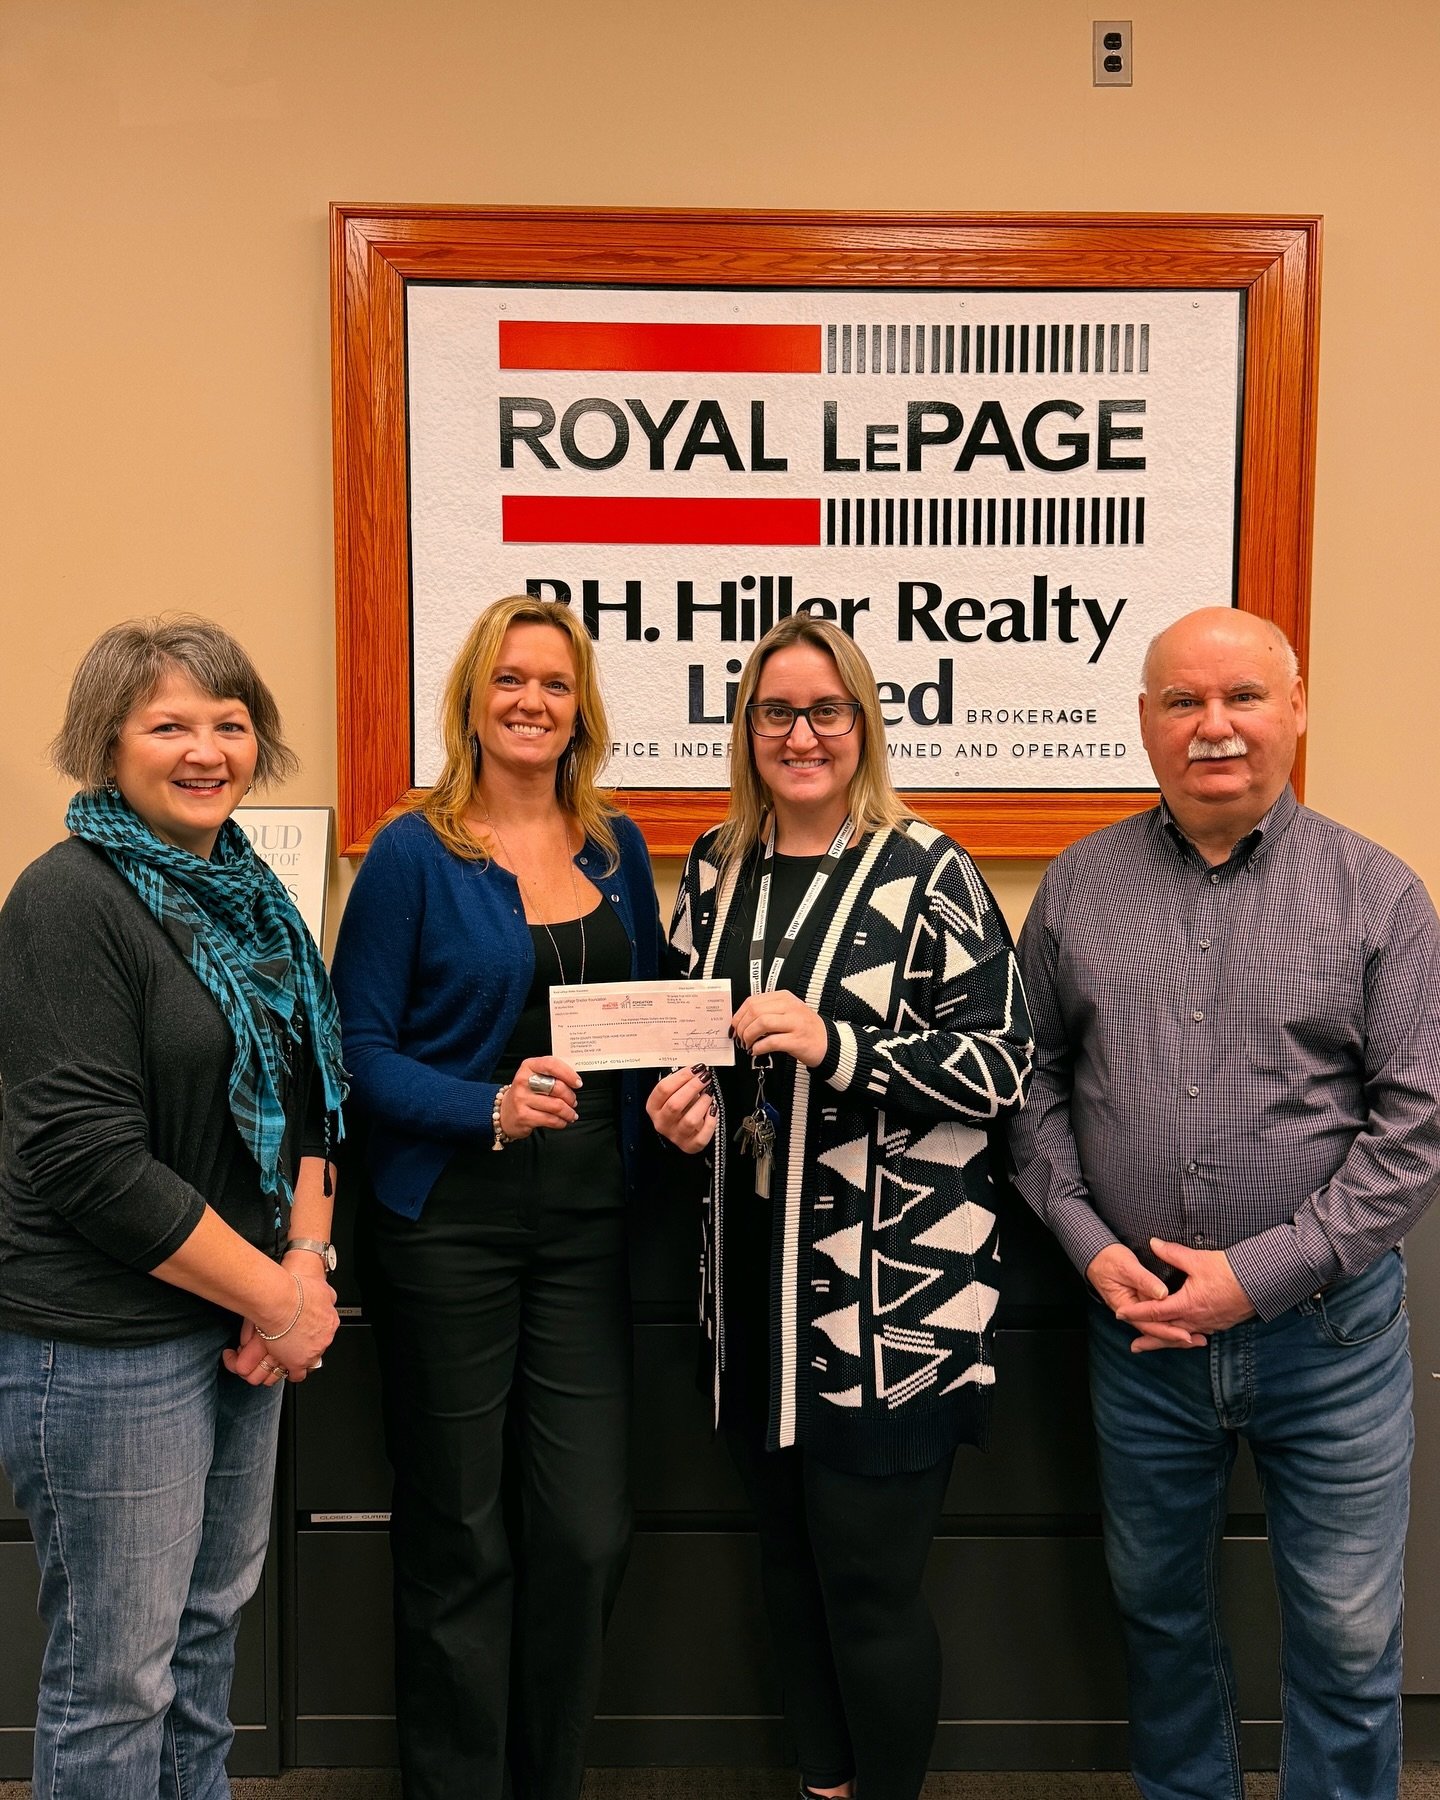 Thanks to our friends at Royal LePage! ❤️

@daveharwood5694 + @sherrieroulston + @jandersonrealestate donate a portion of their earnings every quarter to Optimism Place 💫

We&rsquo;re so grateful for your support!